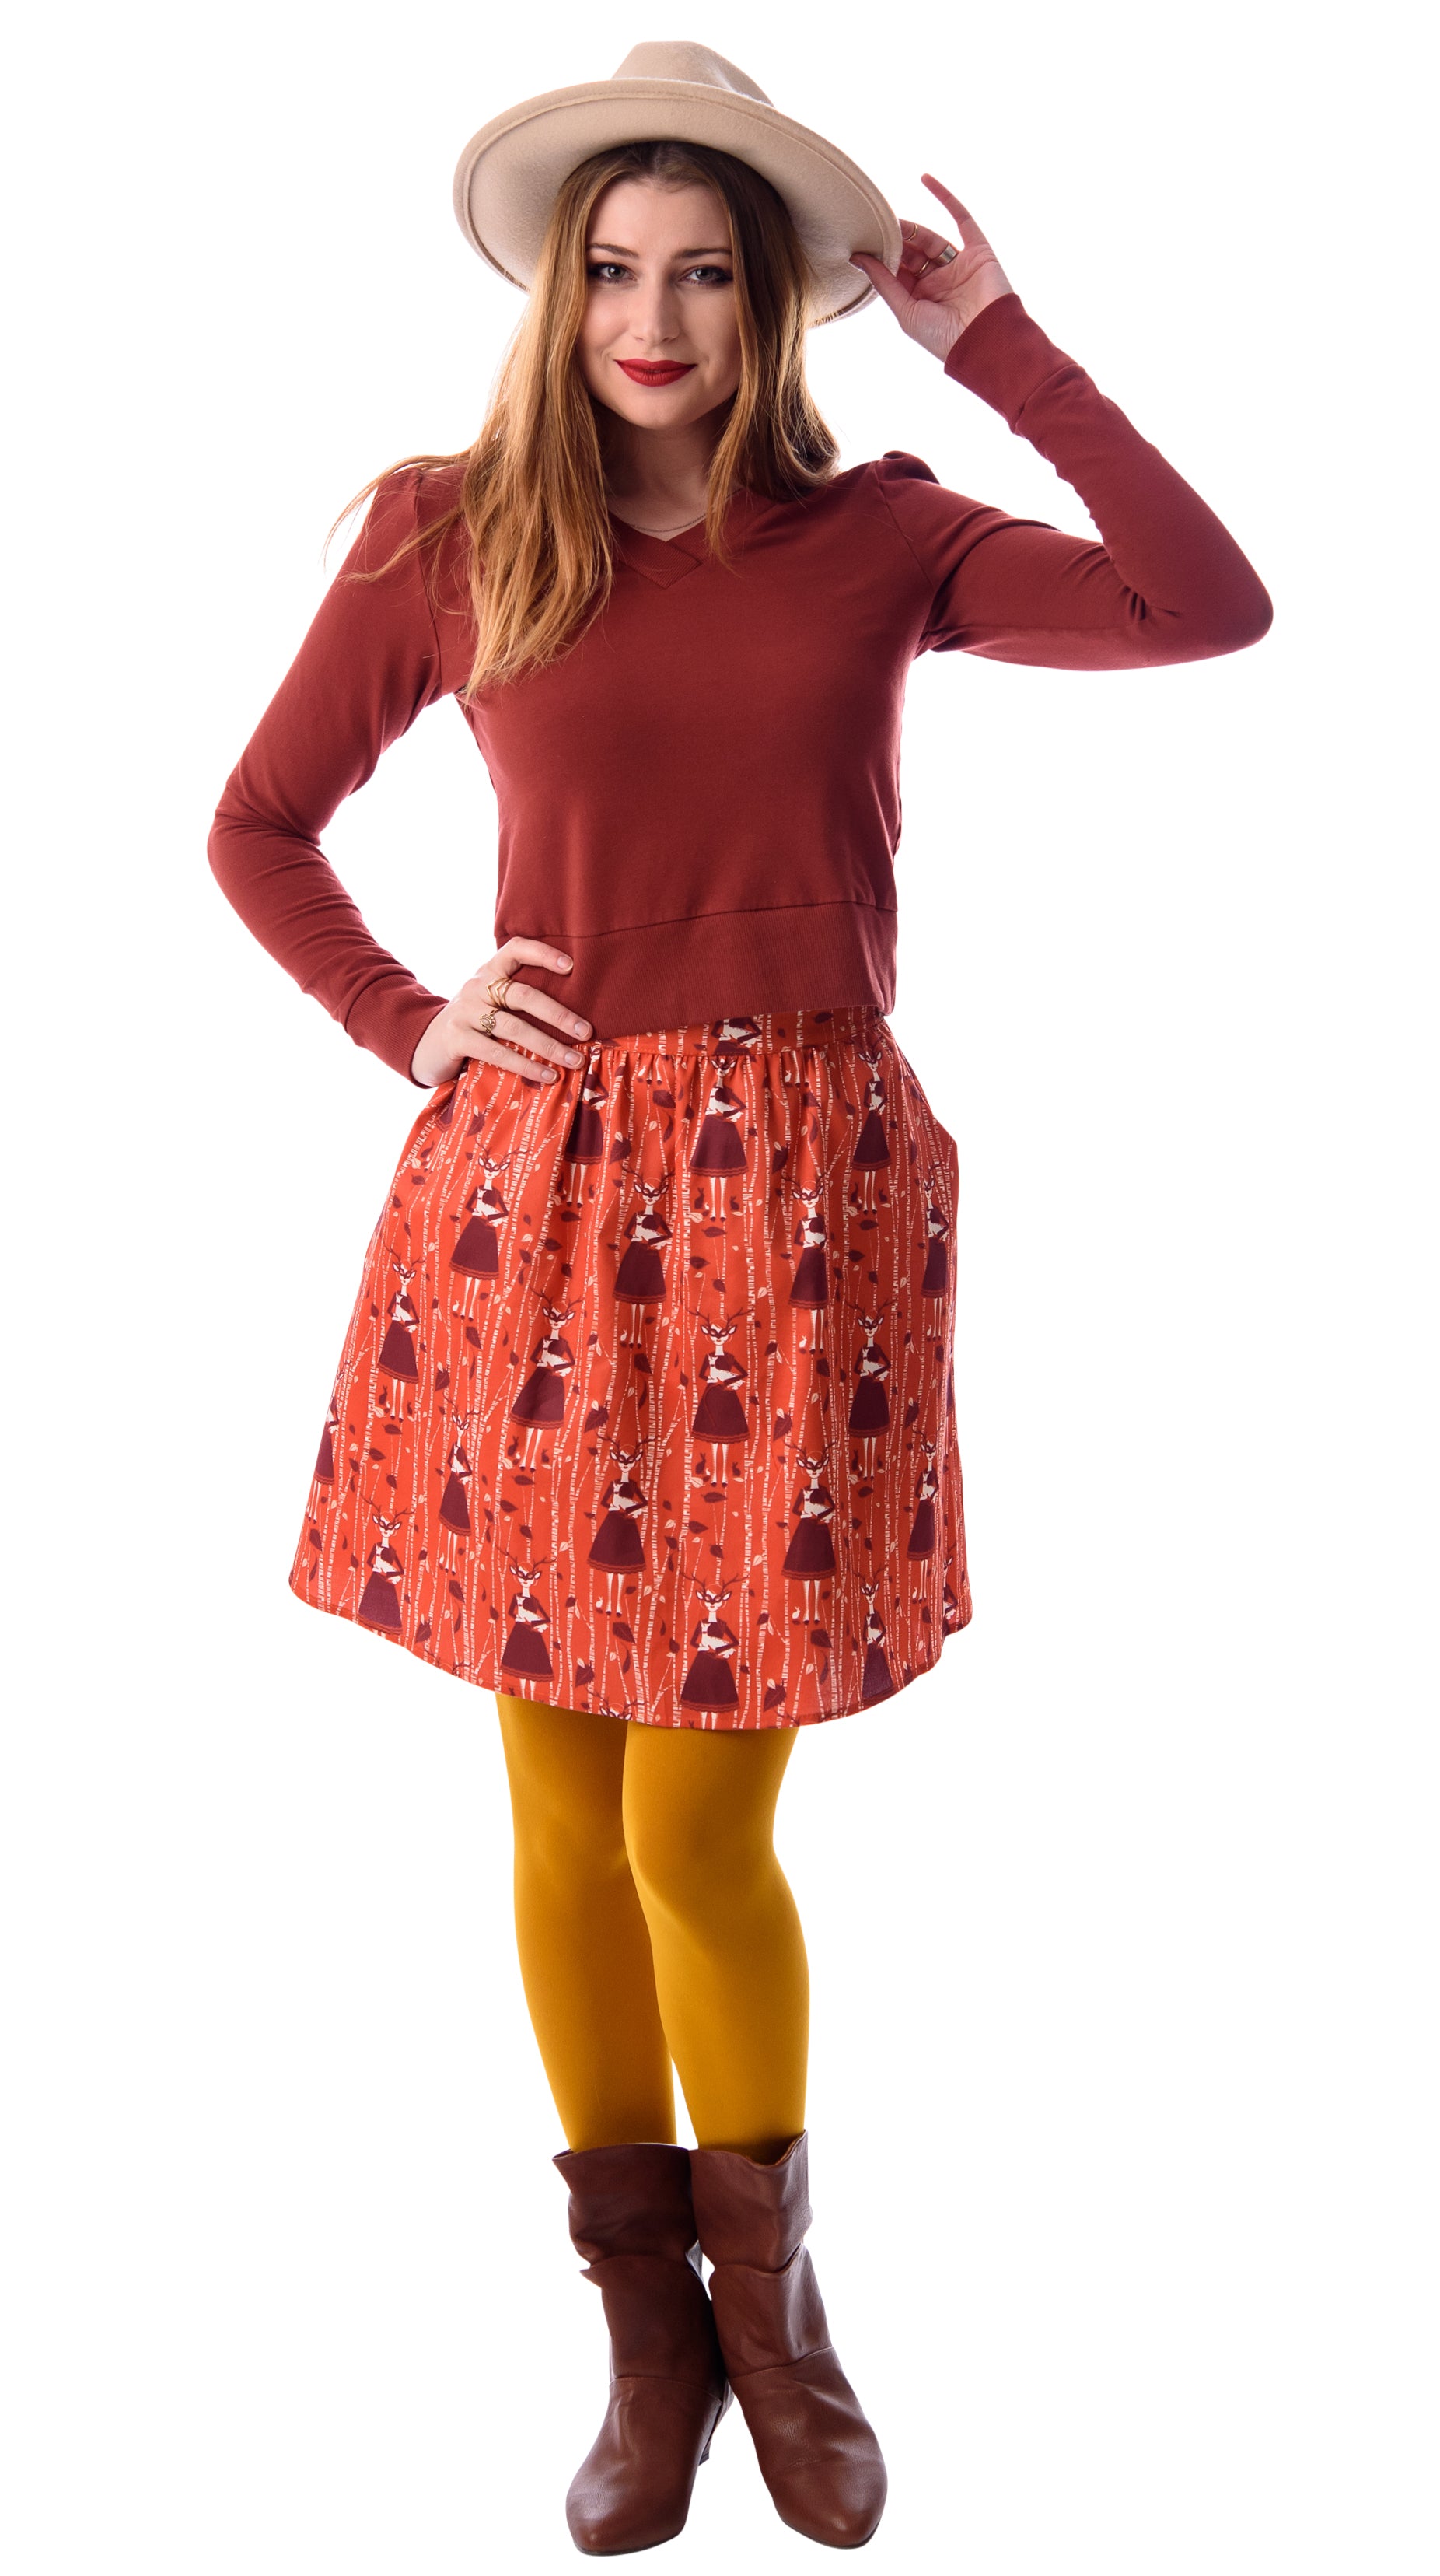 Cropped v-neck French terry top in rust brown with rib trim with cute skirt, tights and boots